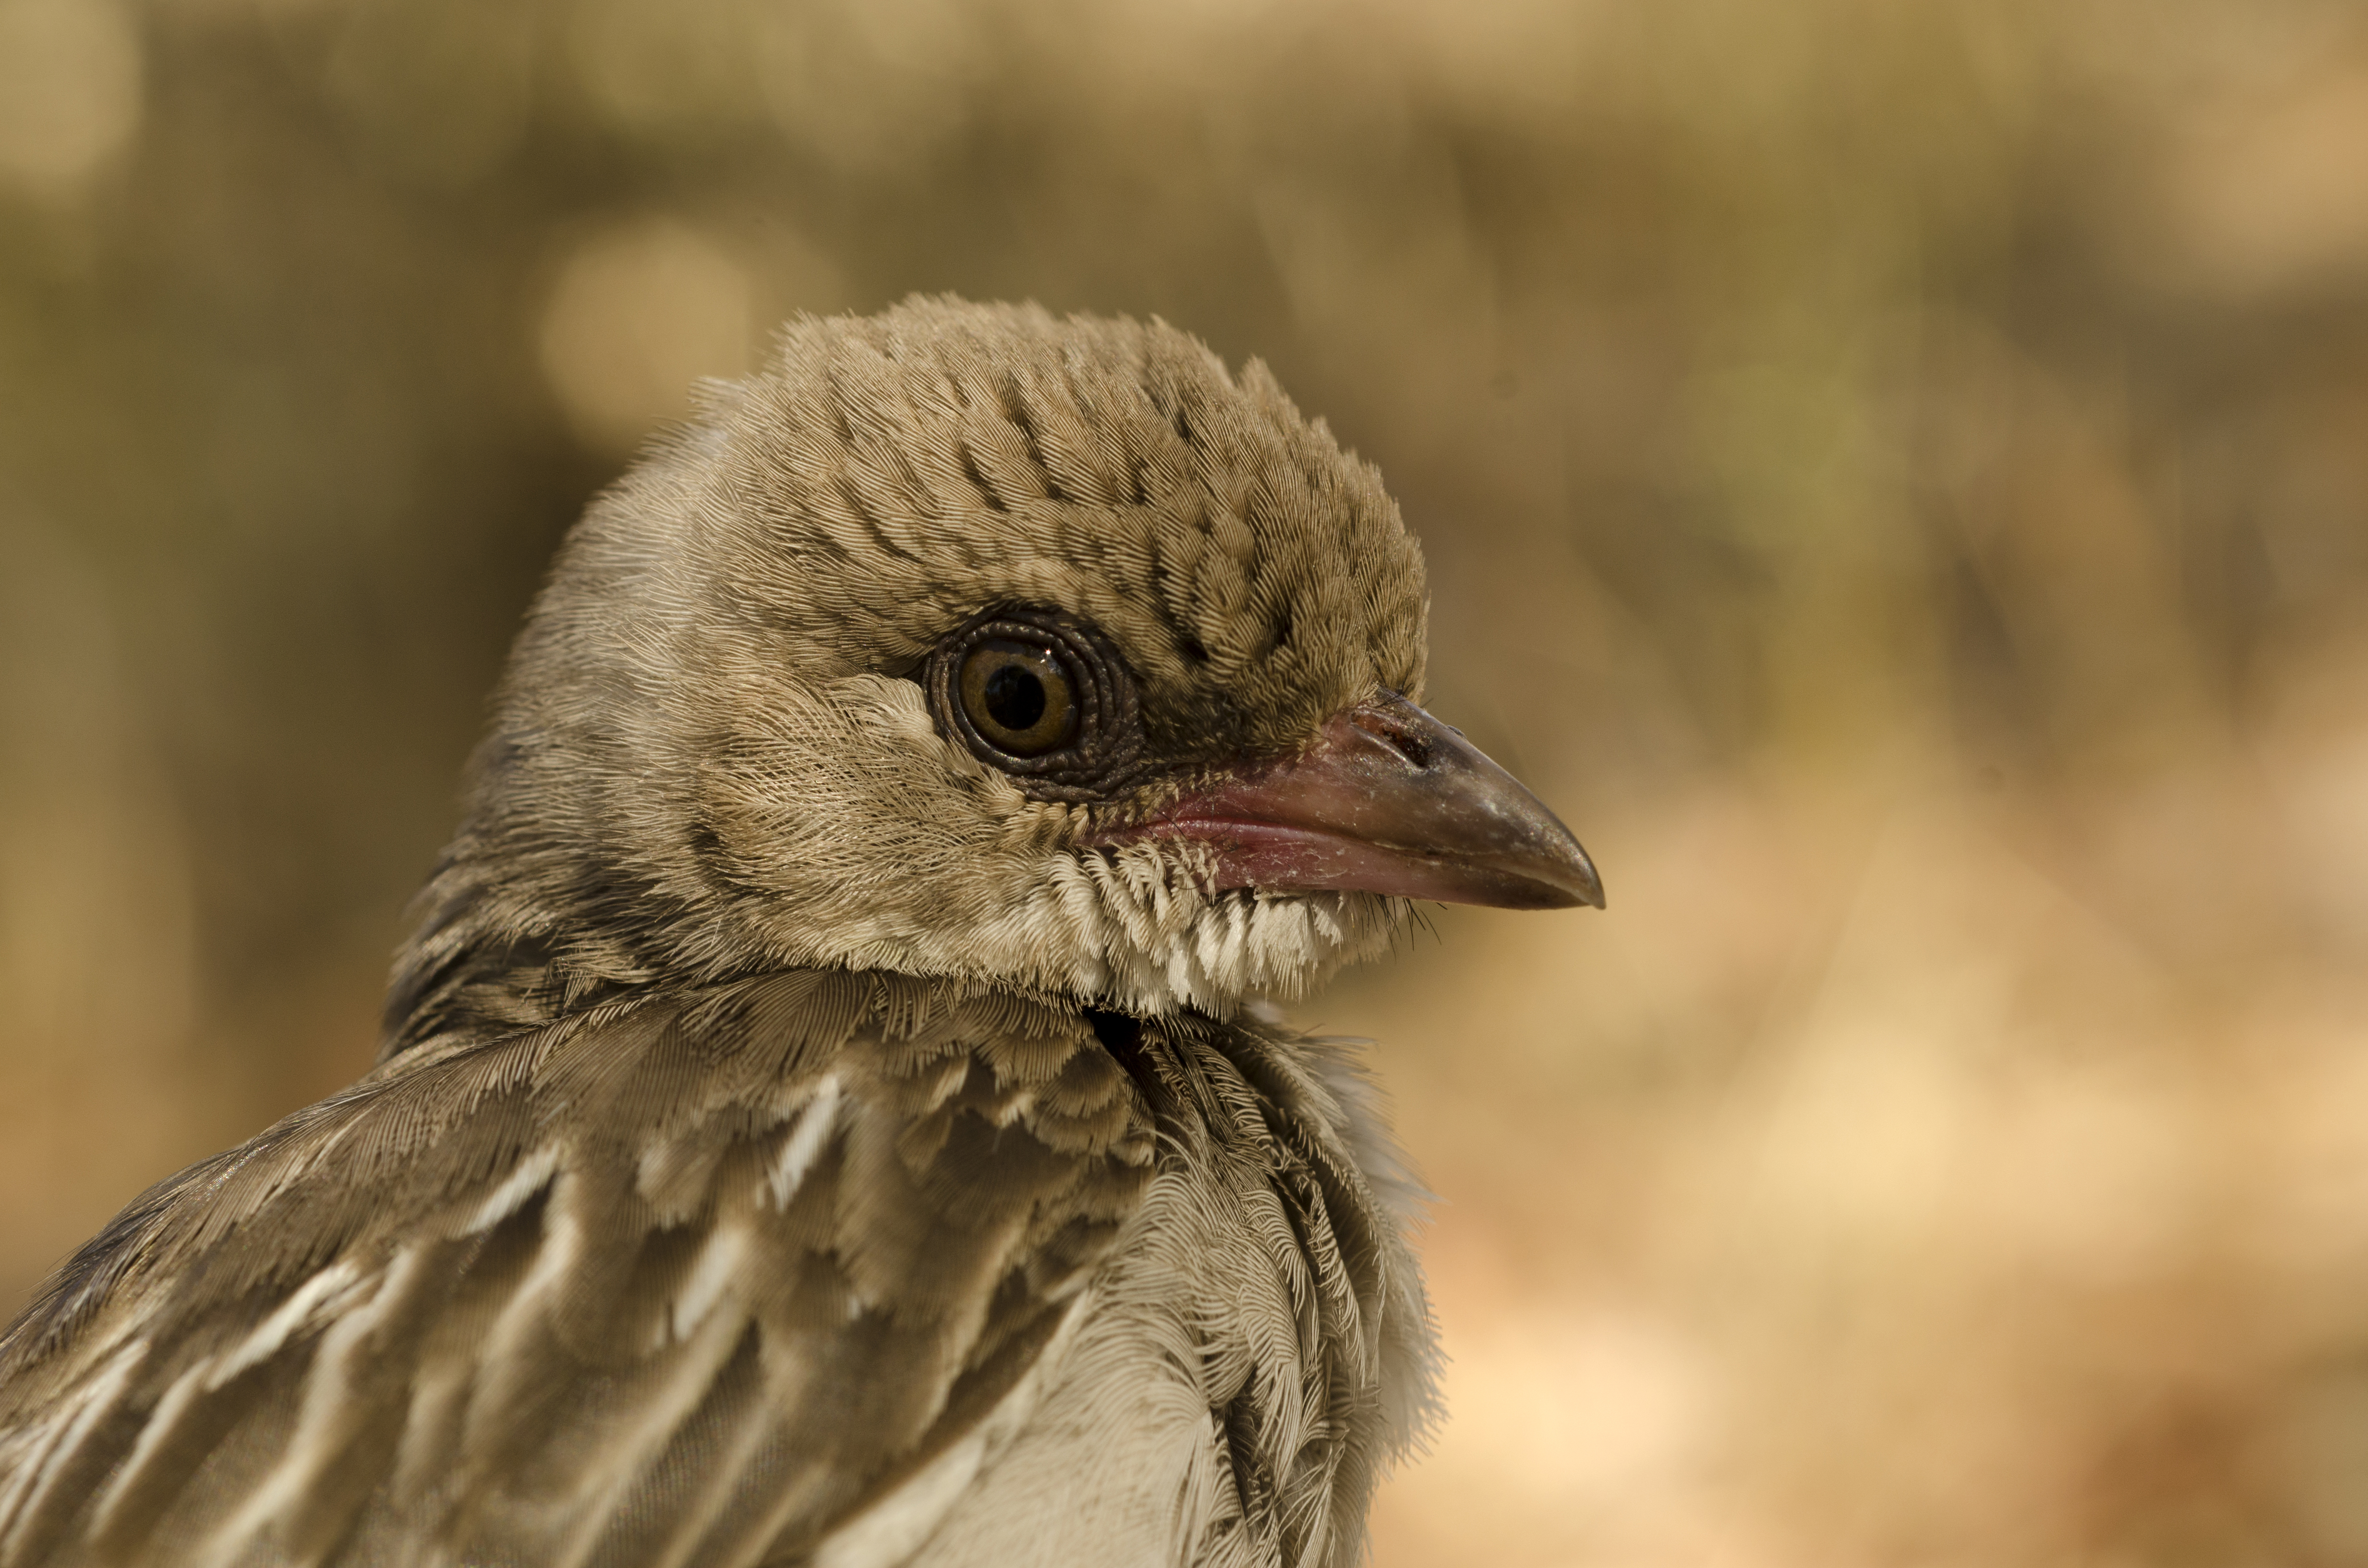 A female greater honeyguide in the Niassa National Reserve, Mozambique. Credit: Claire N. Spottiswoode